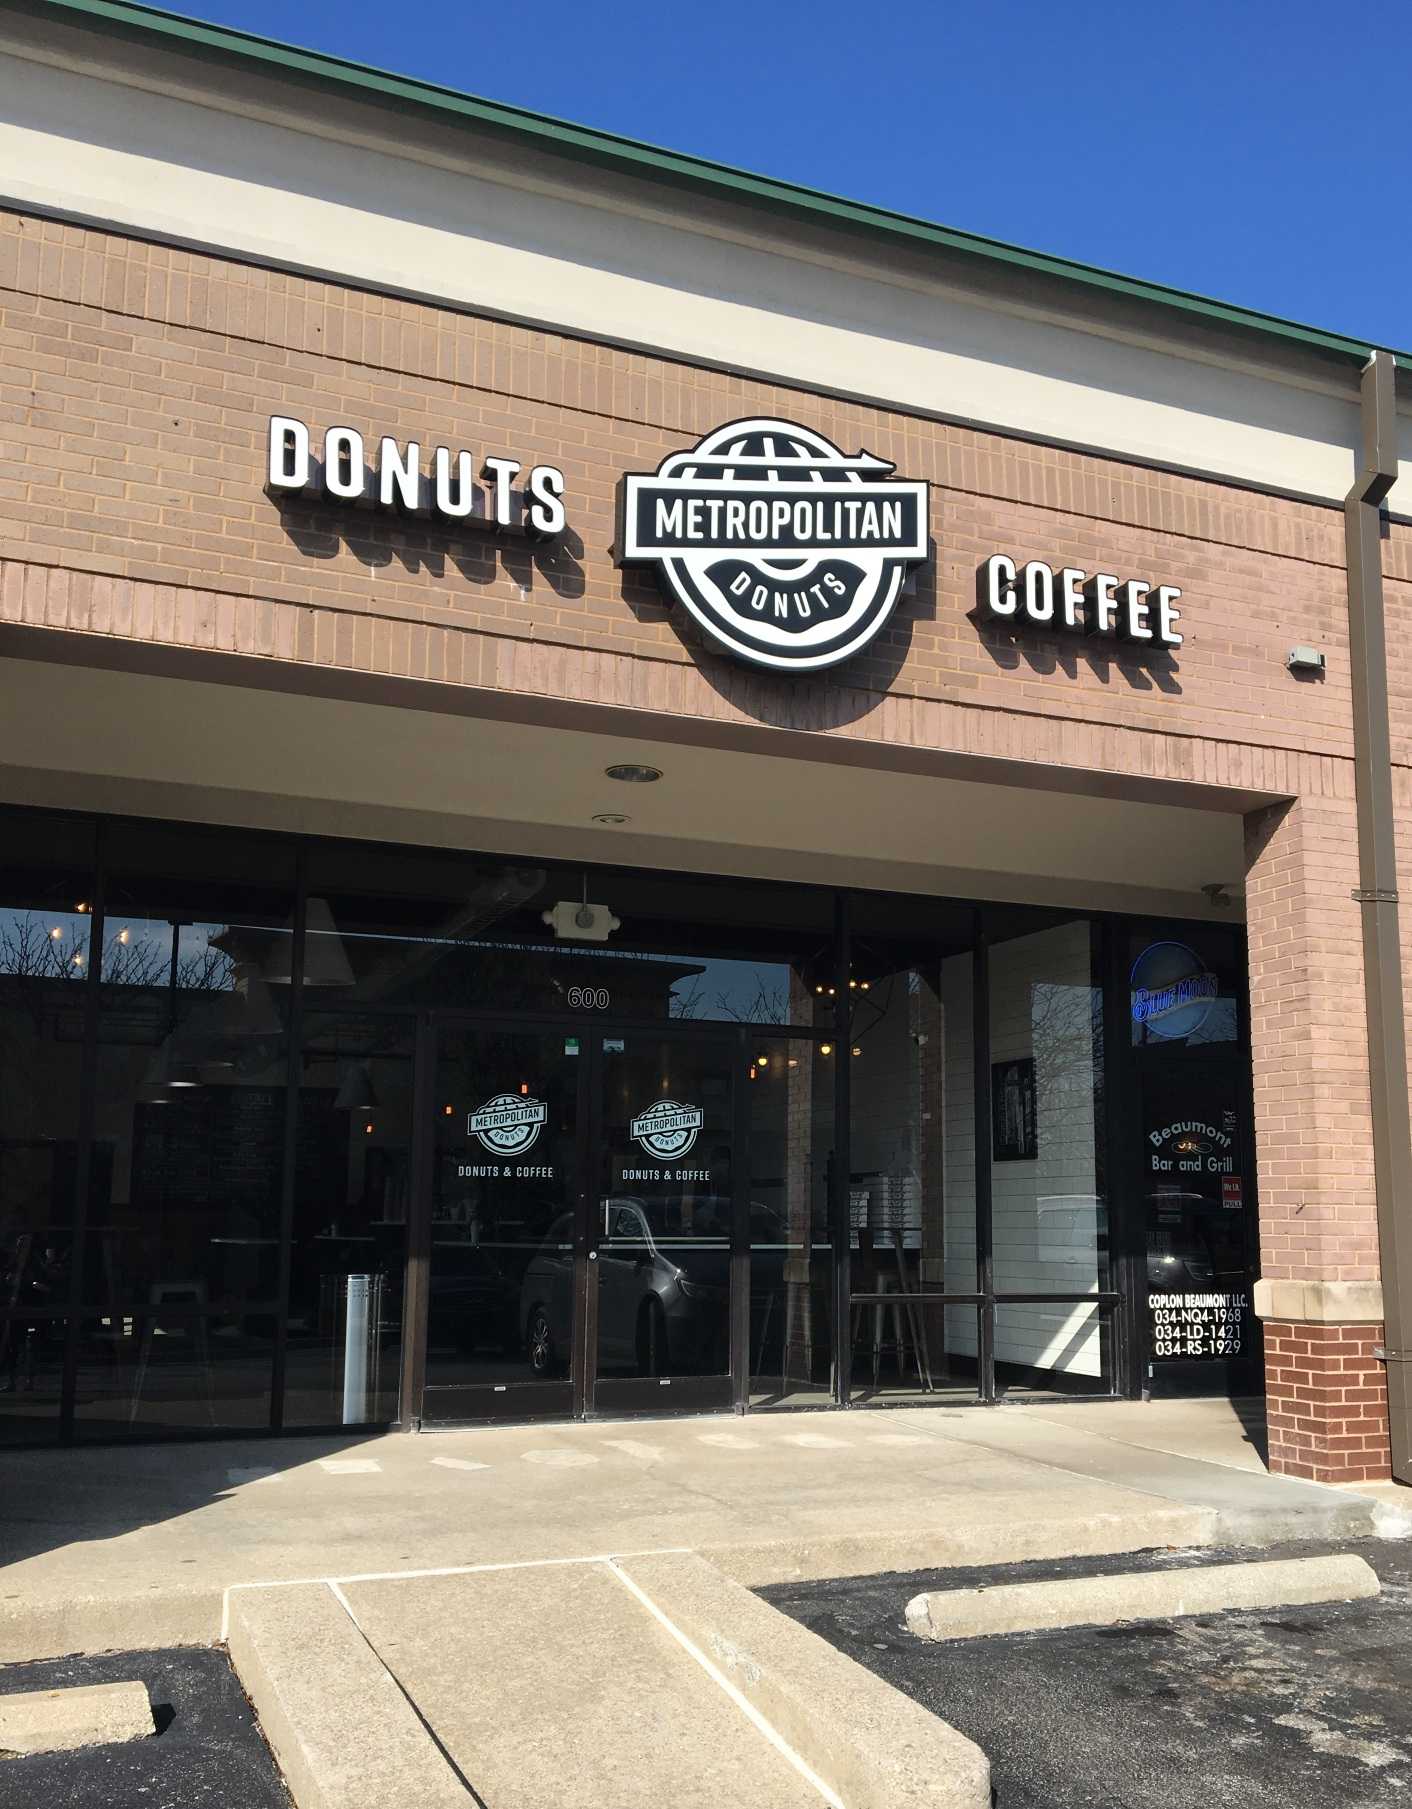 Former+PLD+Officer+Moves+to+New+Career+in+Donut+Shop